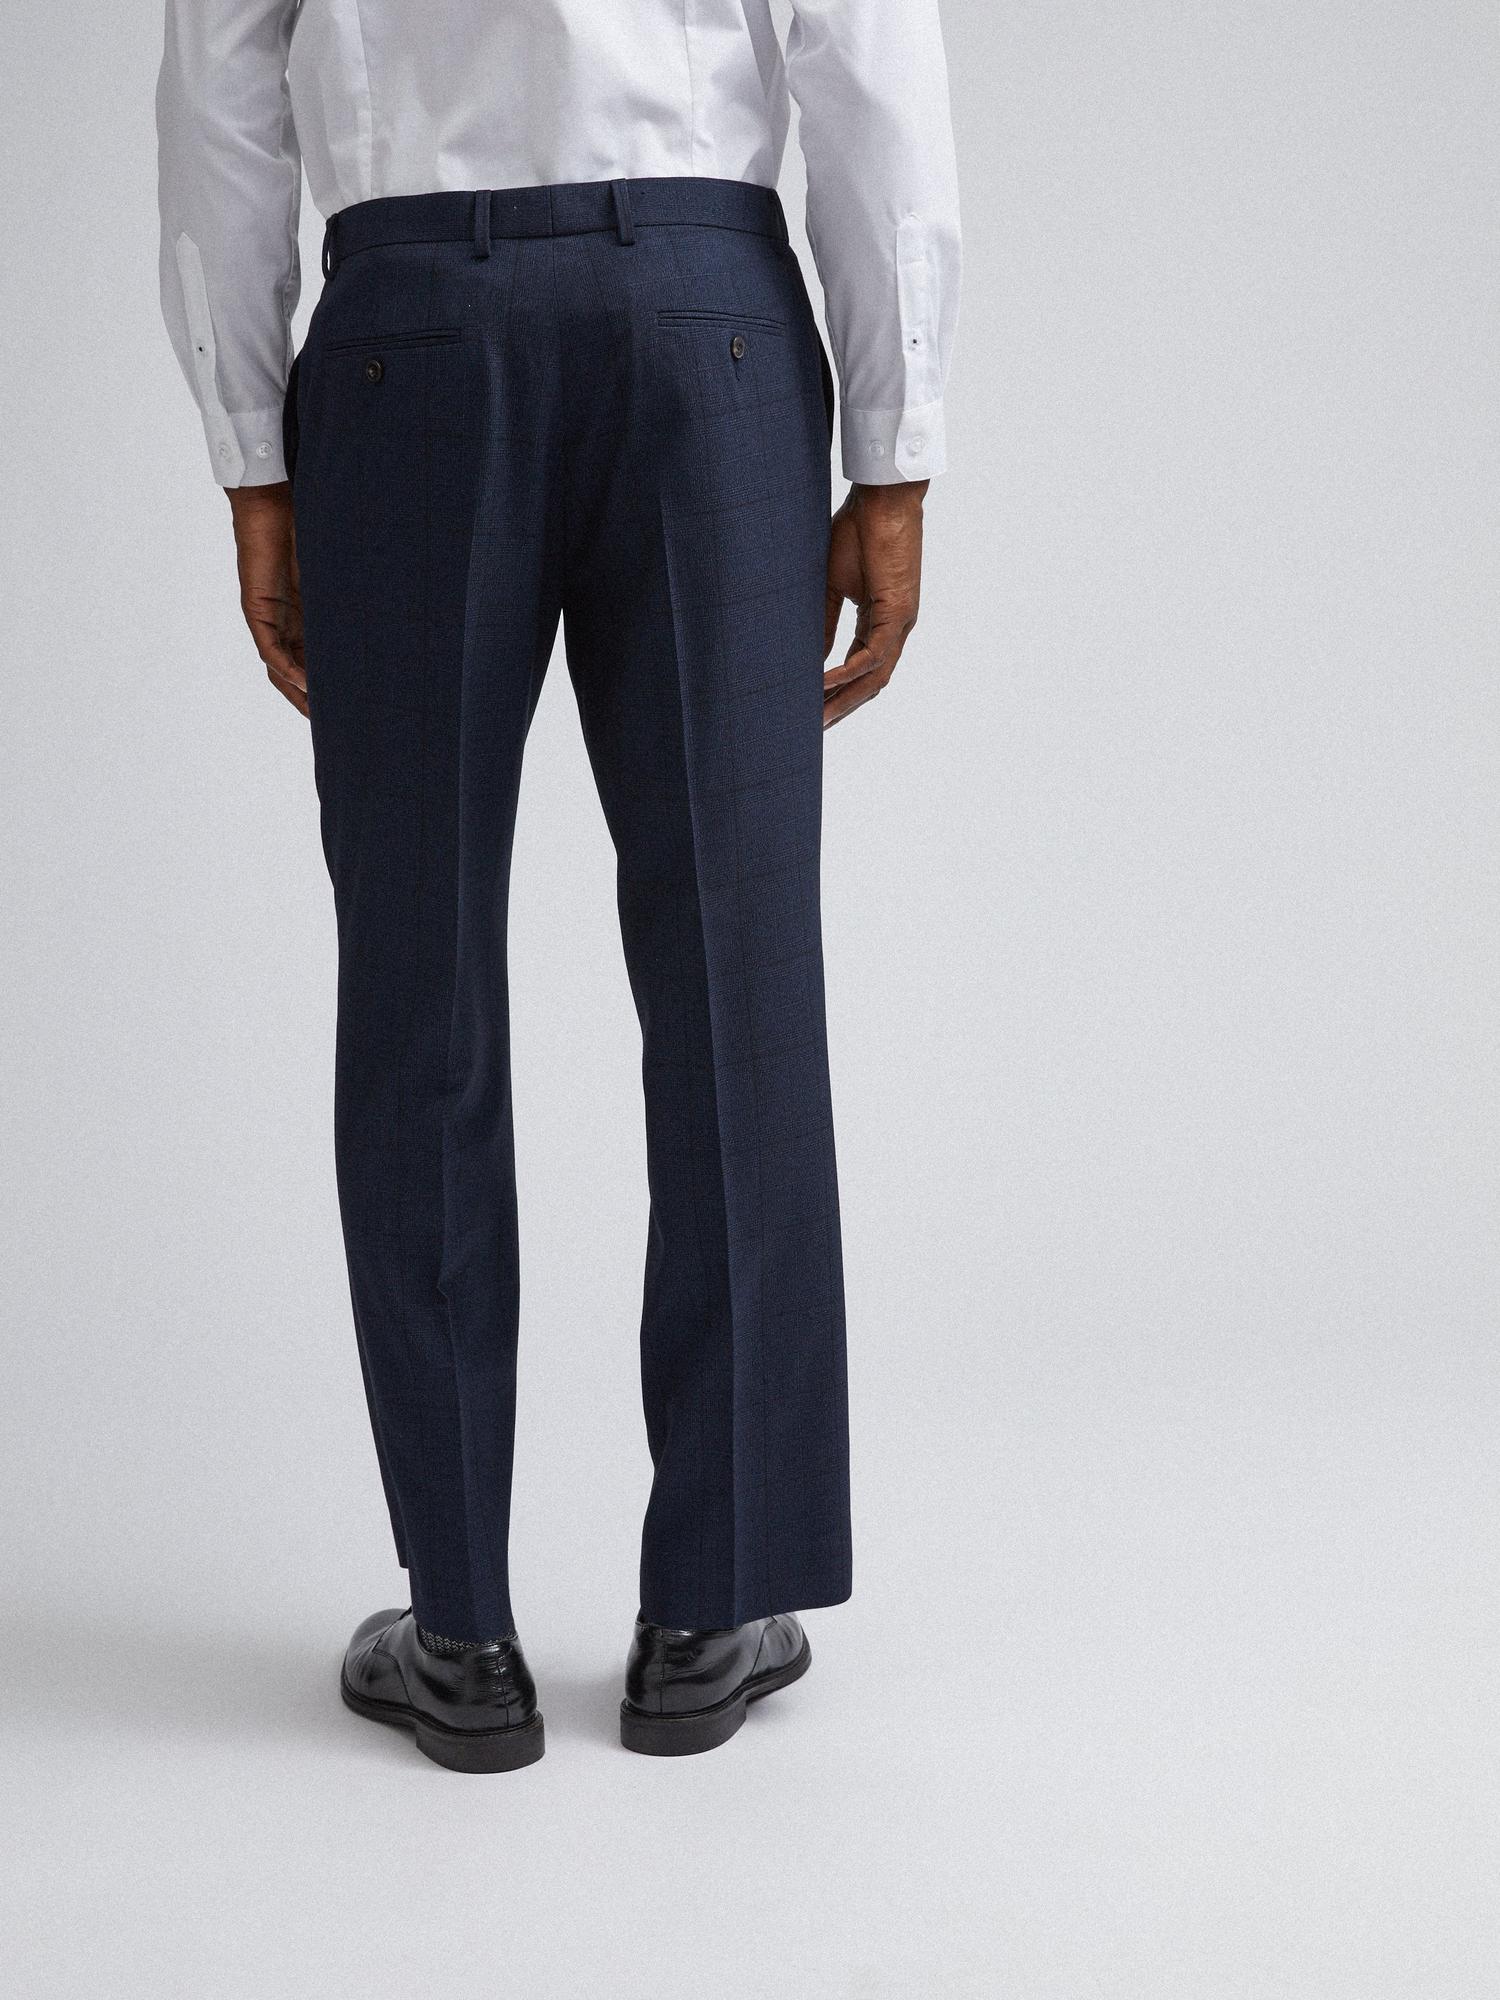 Navy Jaspe Check Tailored Fit Suit Trousers | Burton UK